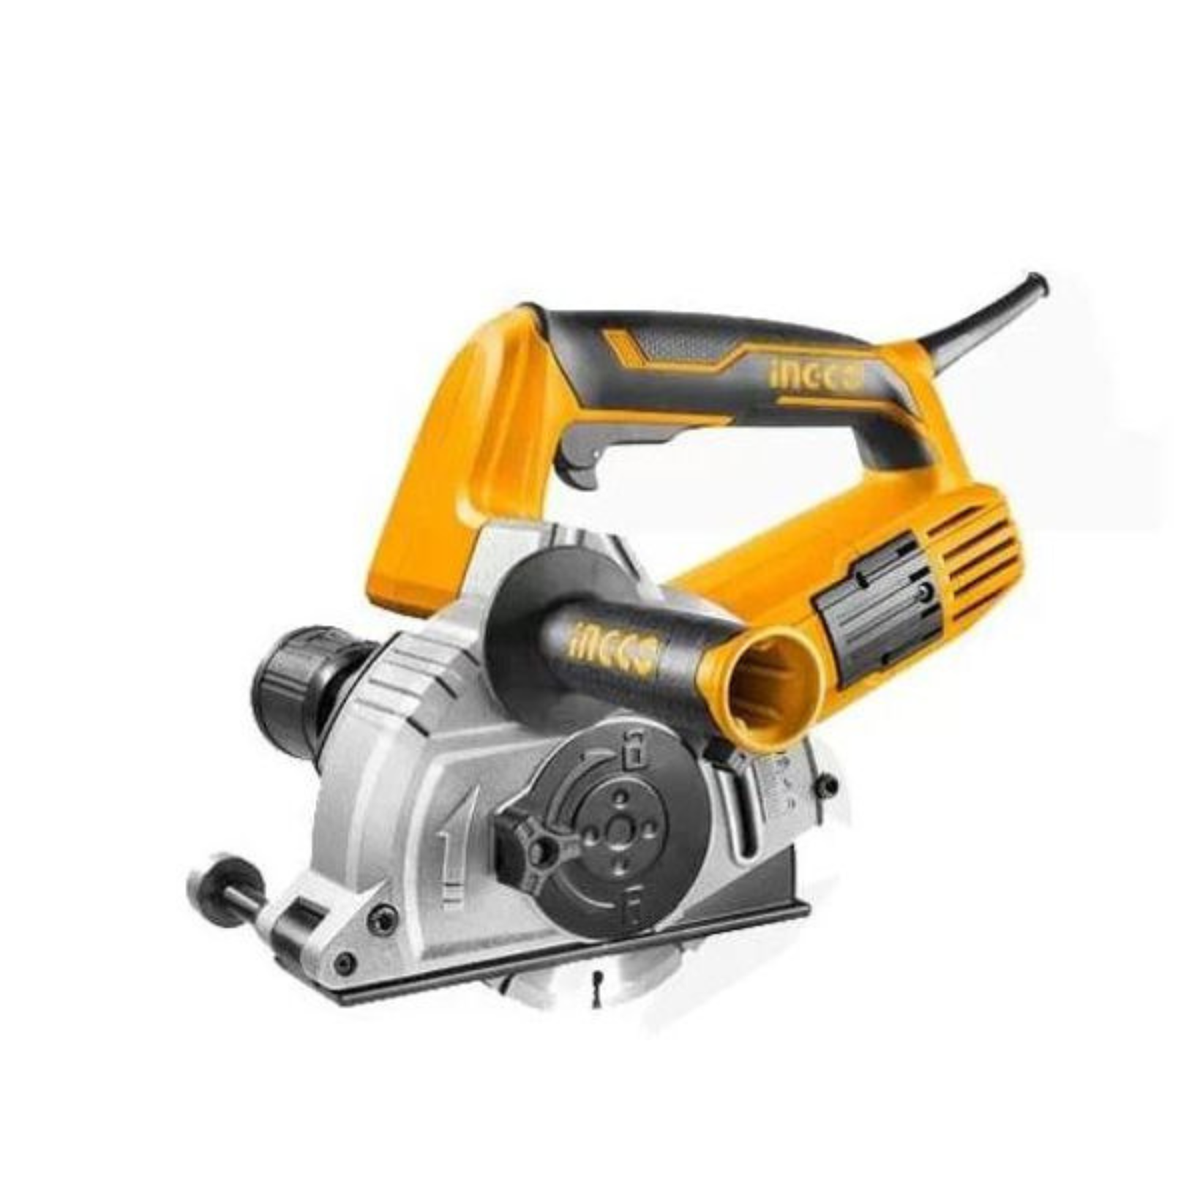 Ingco Wall Chaser 1500W